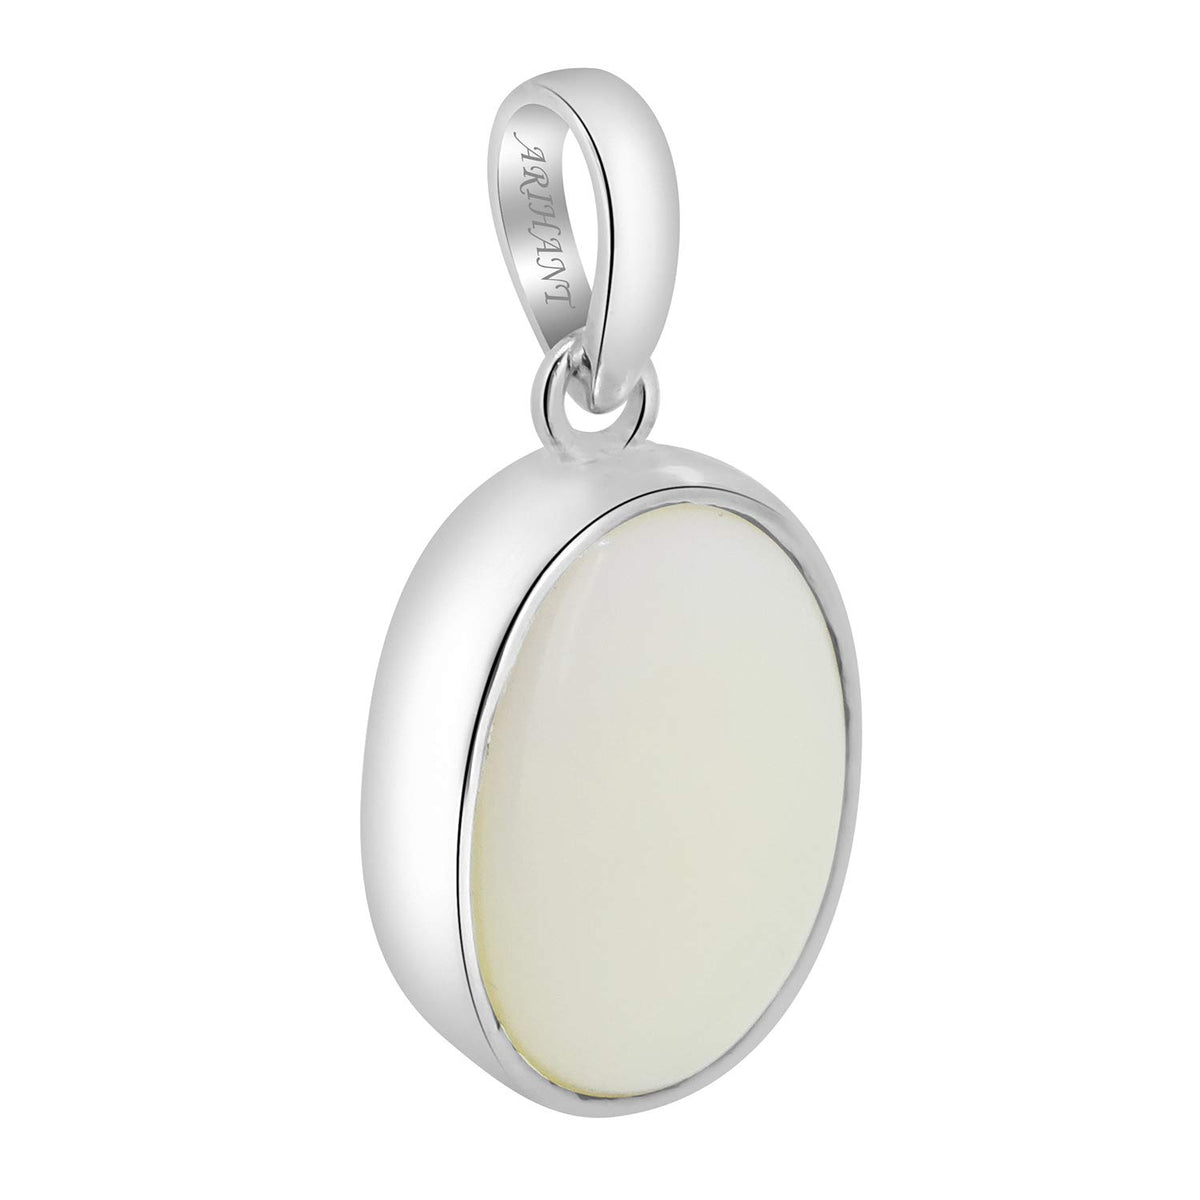 Silver Opal Pendant Natural & Certified White Opal Astrological Gemstone Silver Pendent by Arihant Gems and Gems